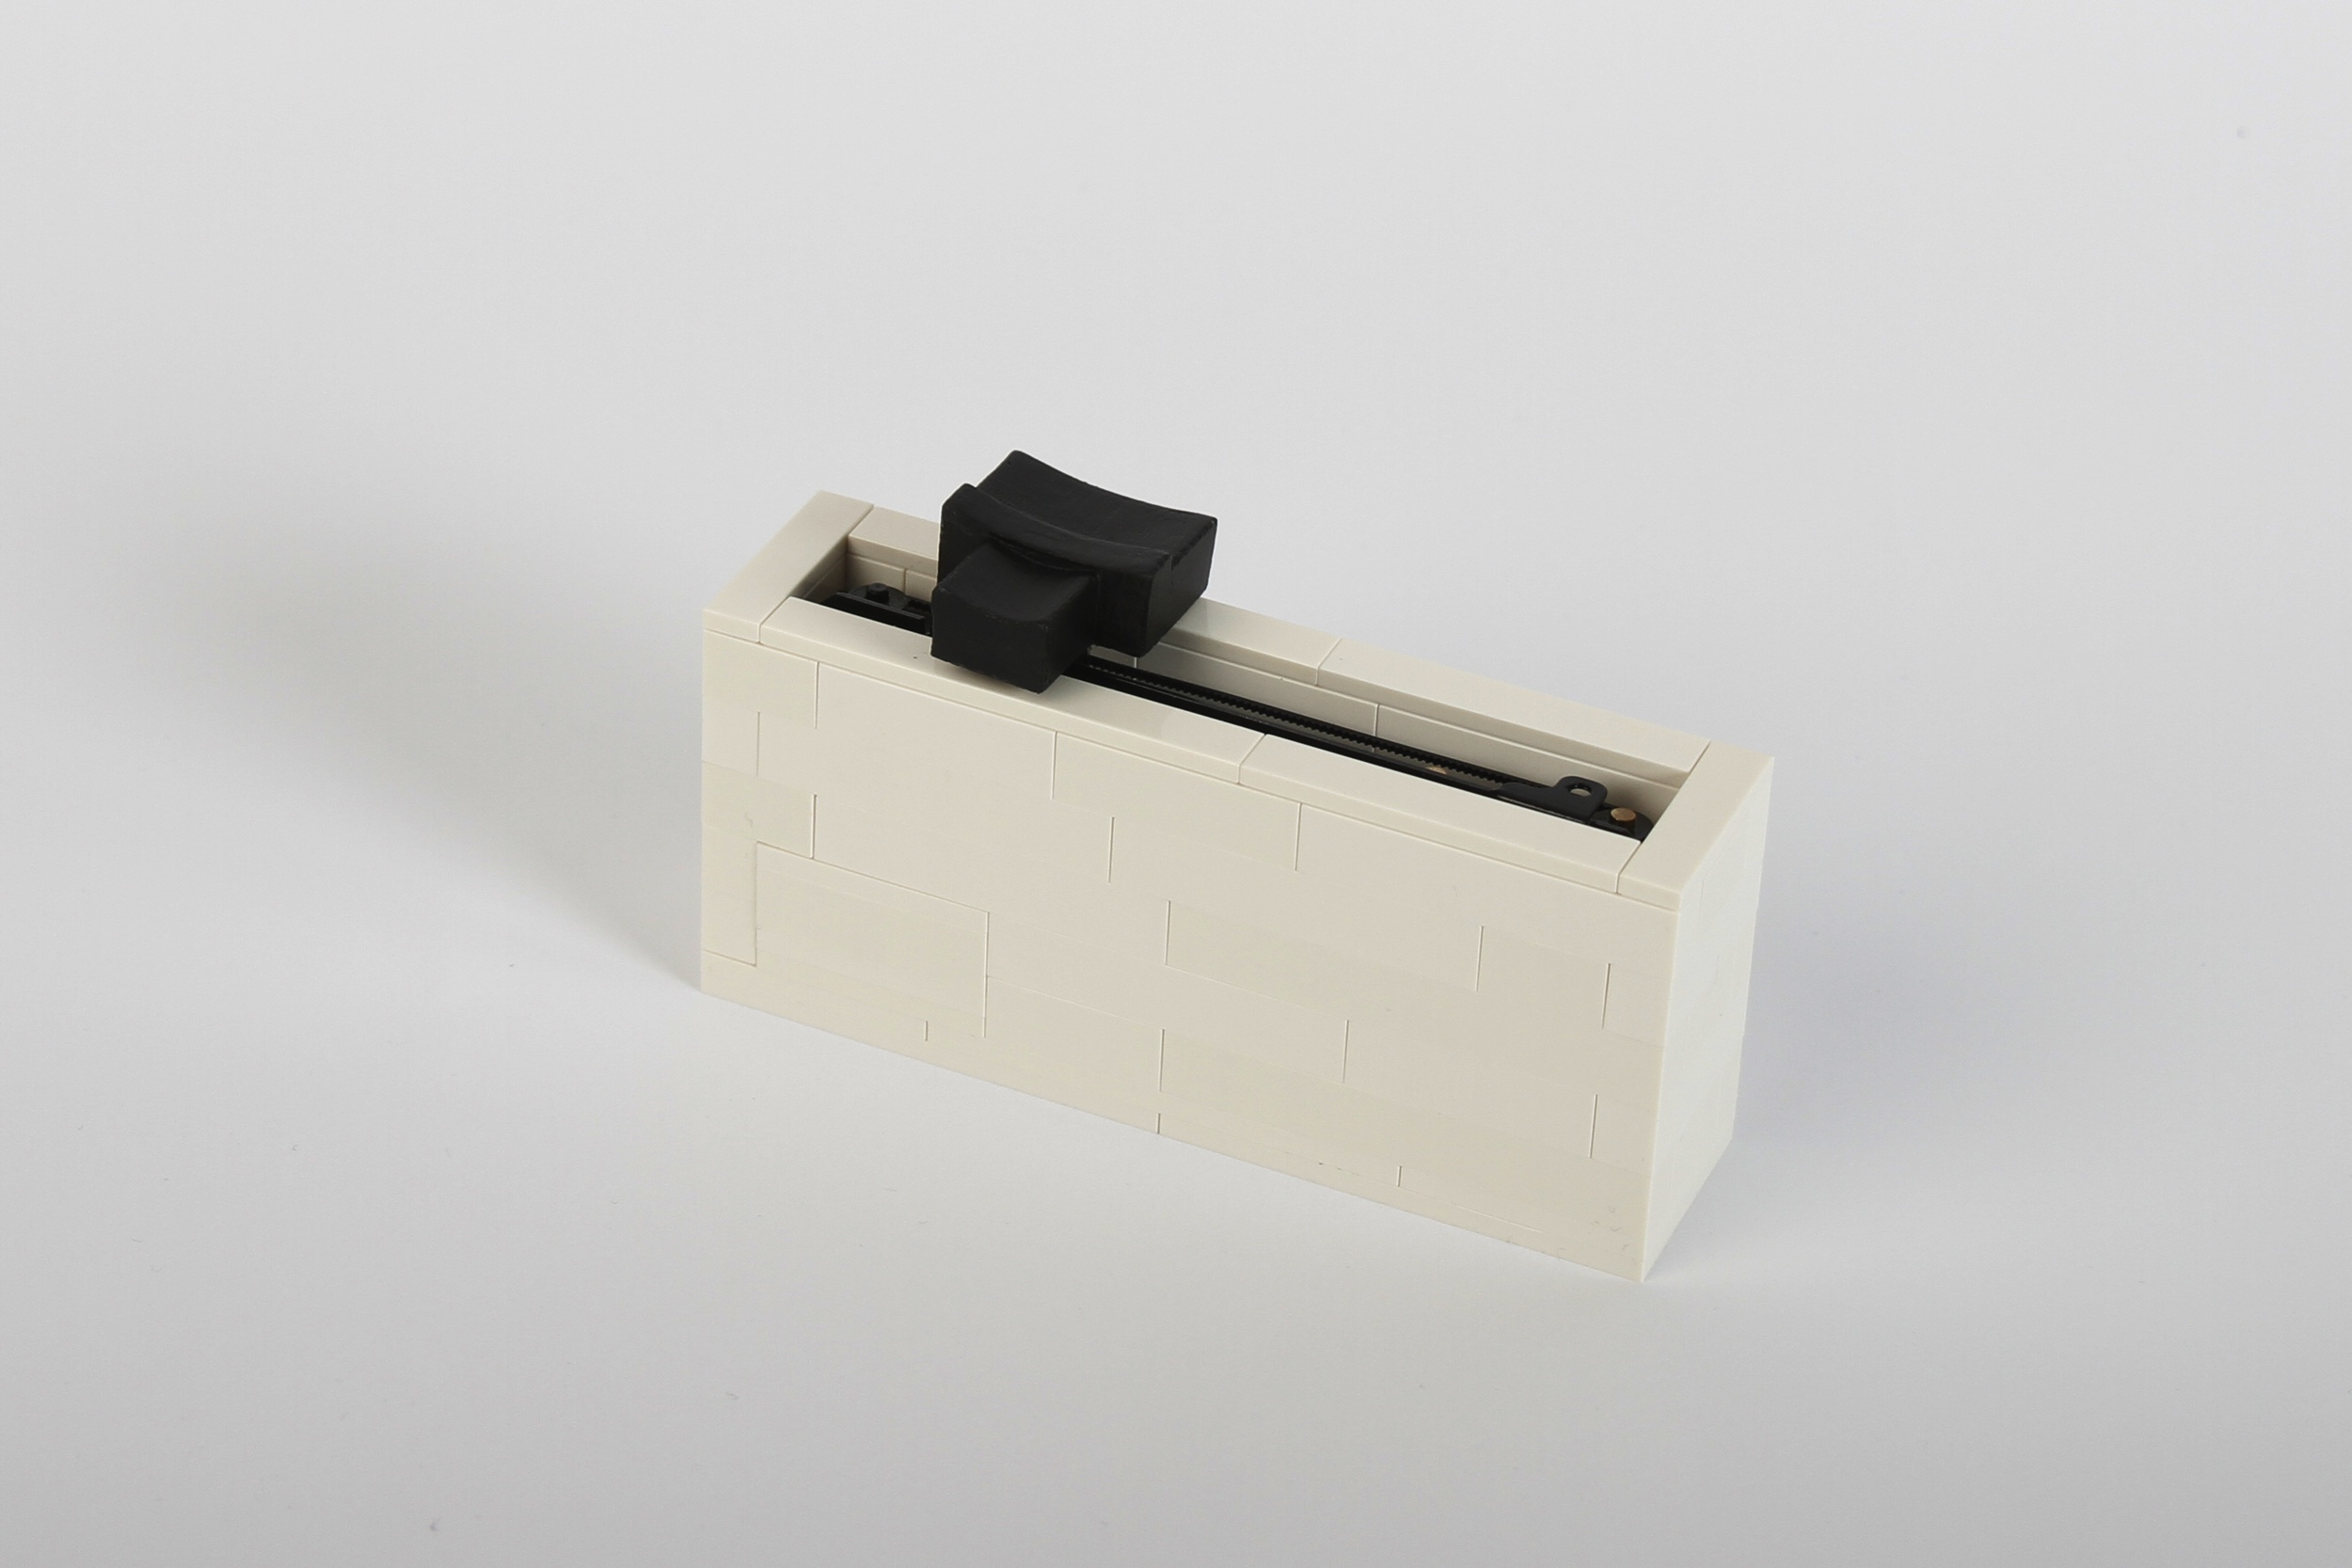 Gesture Fader in a Lego housing.